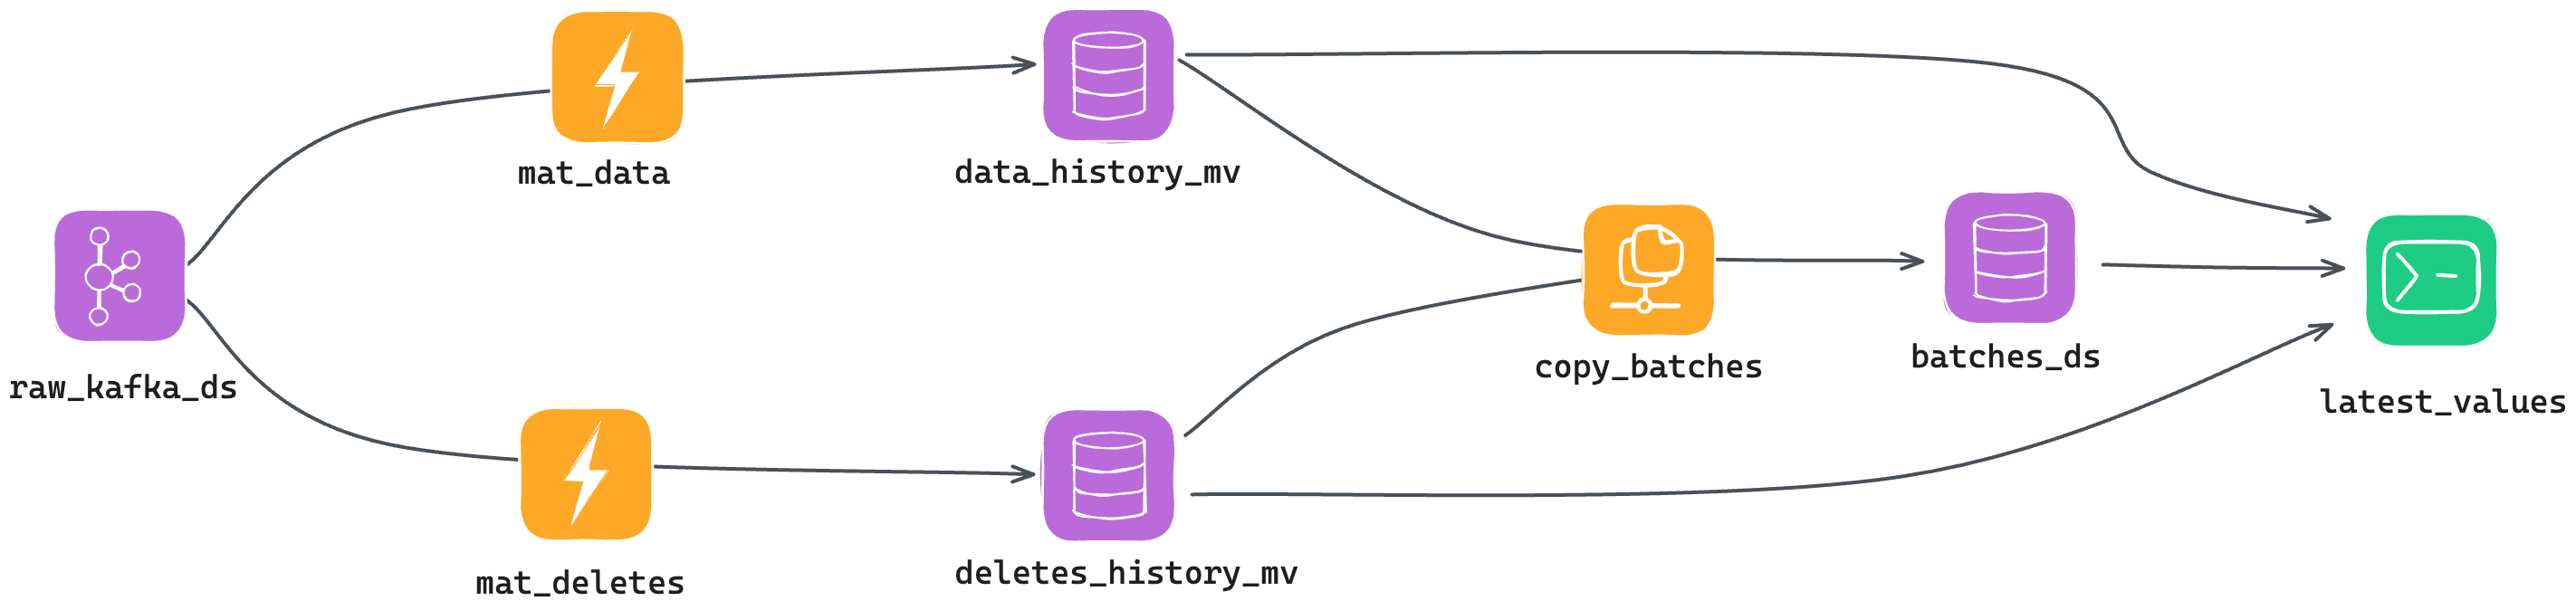 An overview of the Data Flow, with a Kafka Data source, two Materialized Views to keep track of changes and deletes, a Copy Pipe to deduplicate in batches, and a Pipe to combine all Data Sources